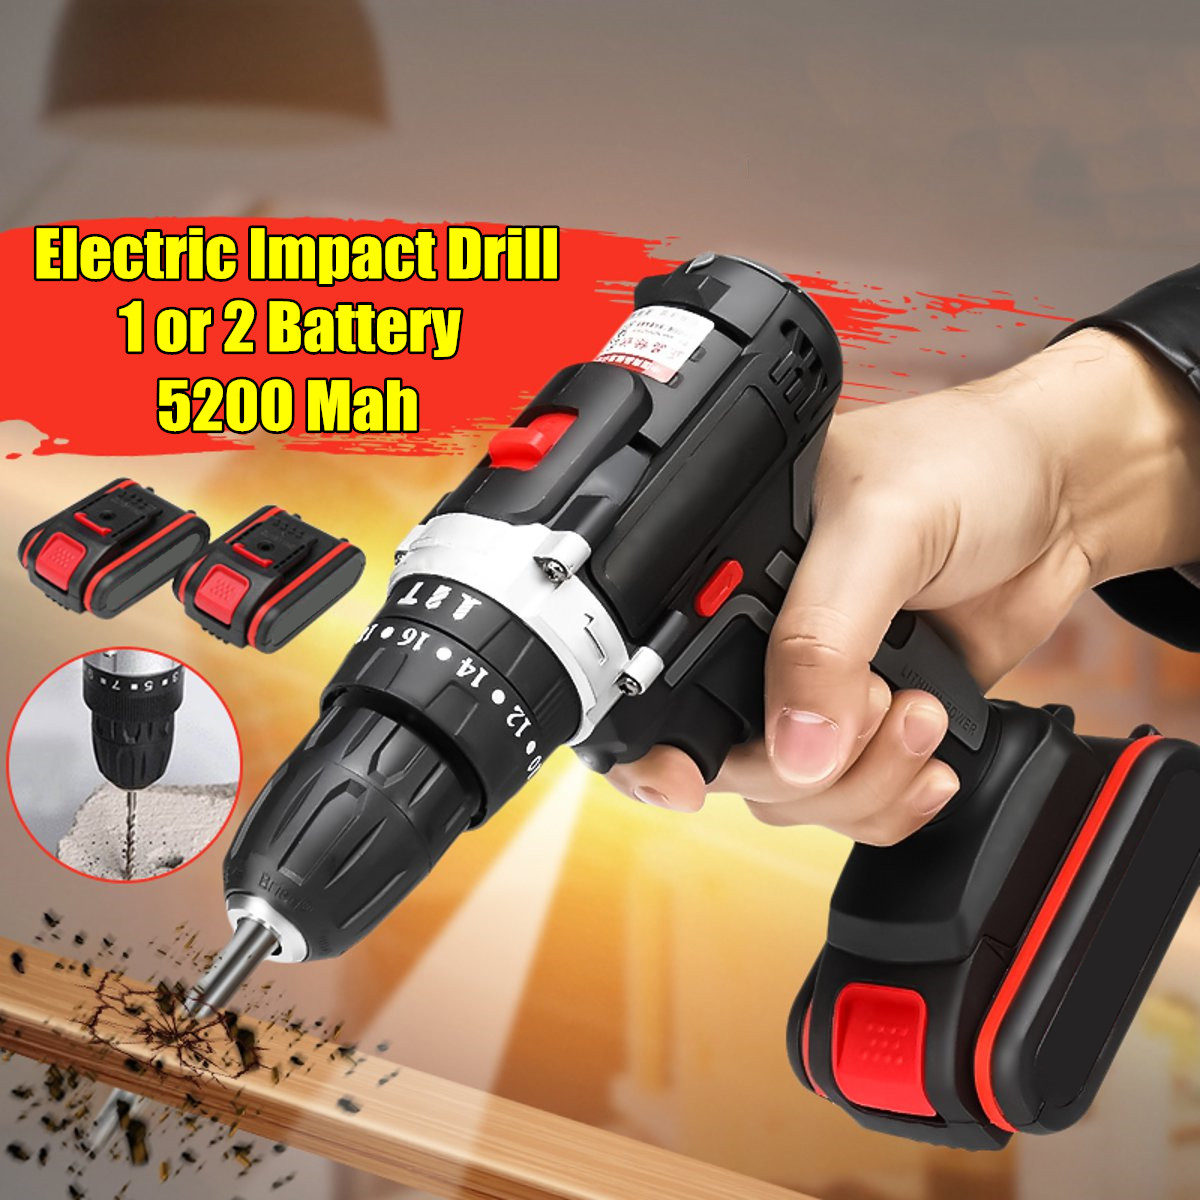 36V-1200-RPM-25Nm-Cordless-Electric-Screwdriver-253-Impact-Drill-with-Battery-1955731-1